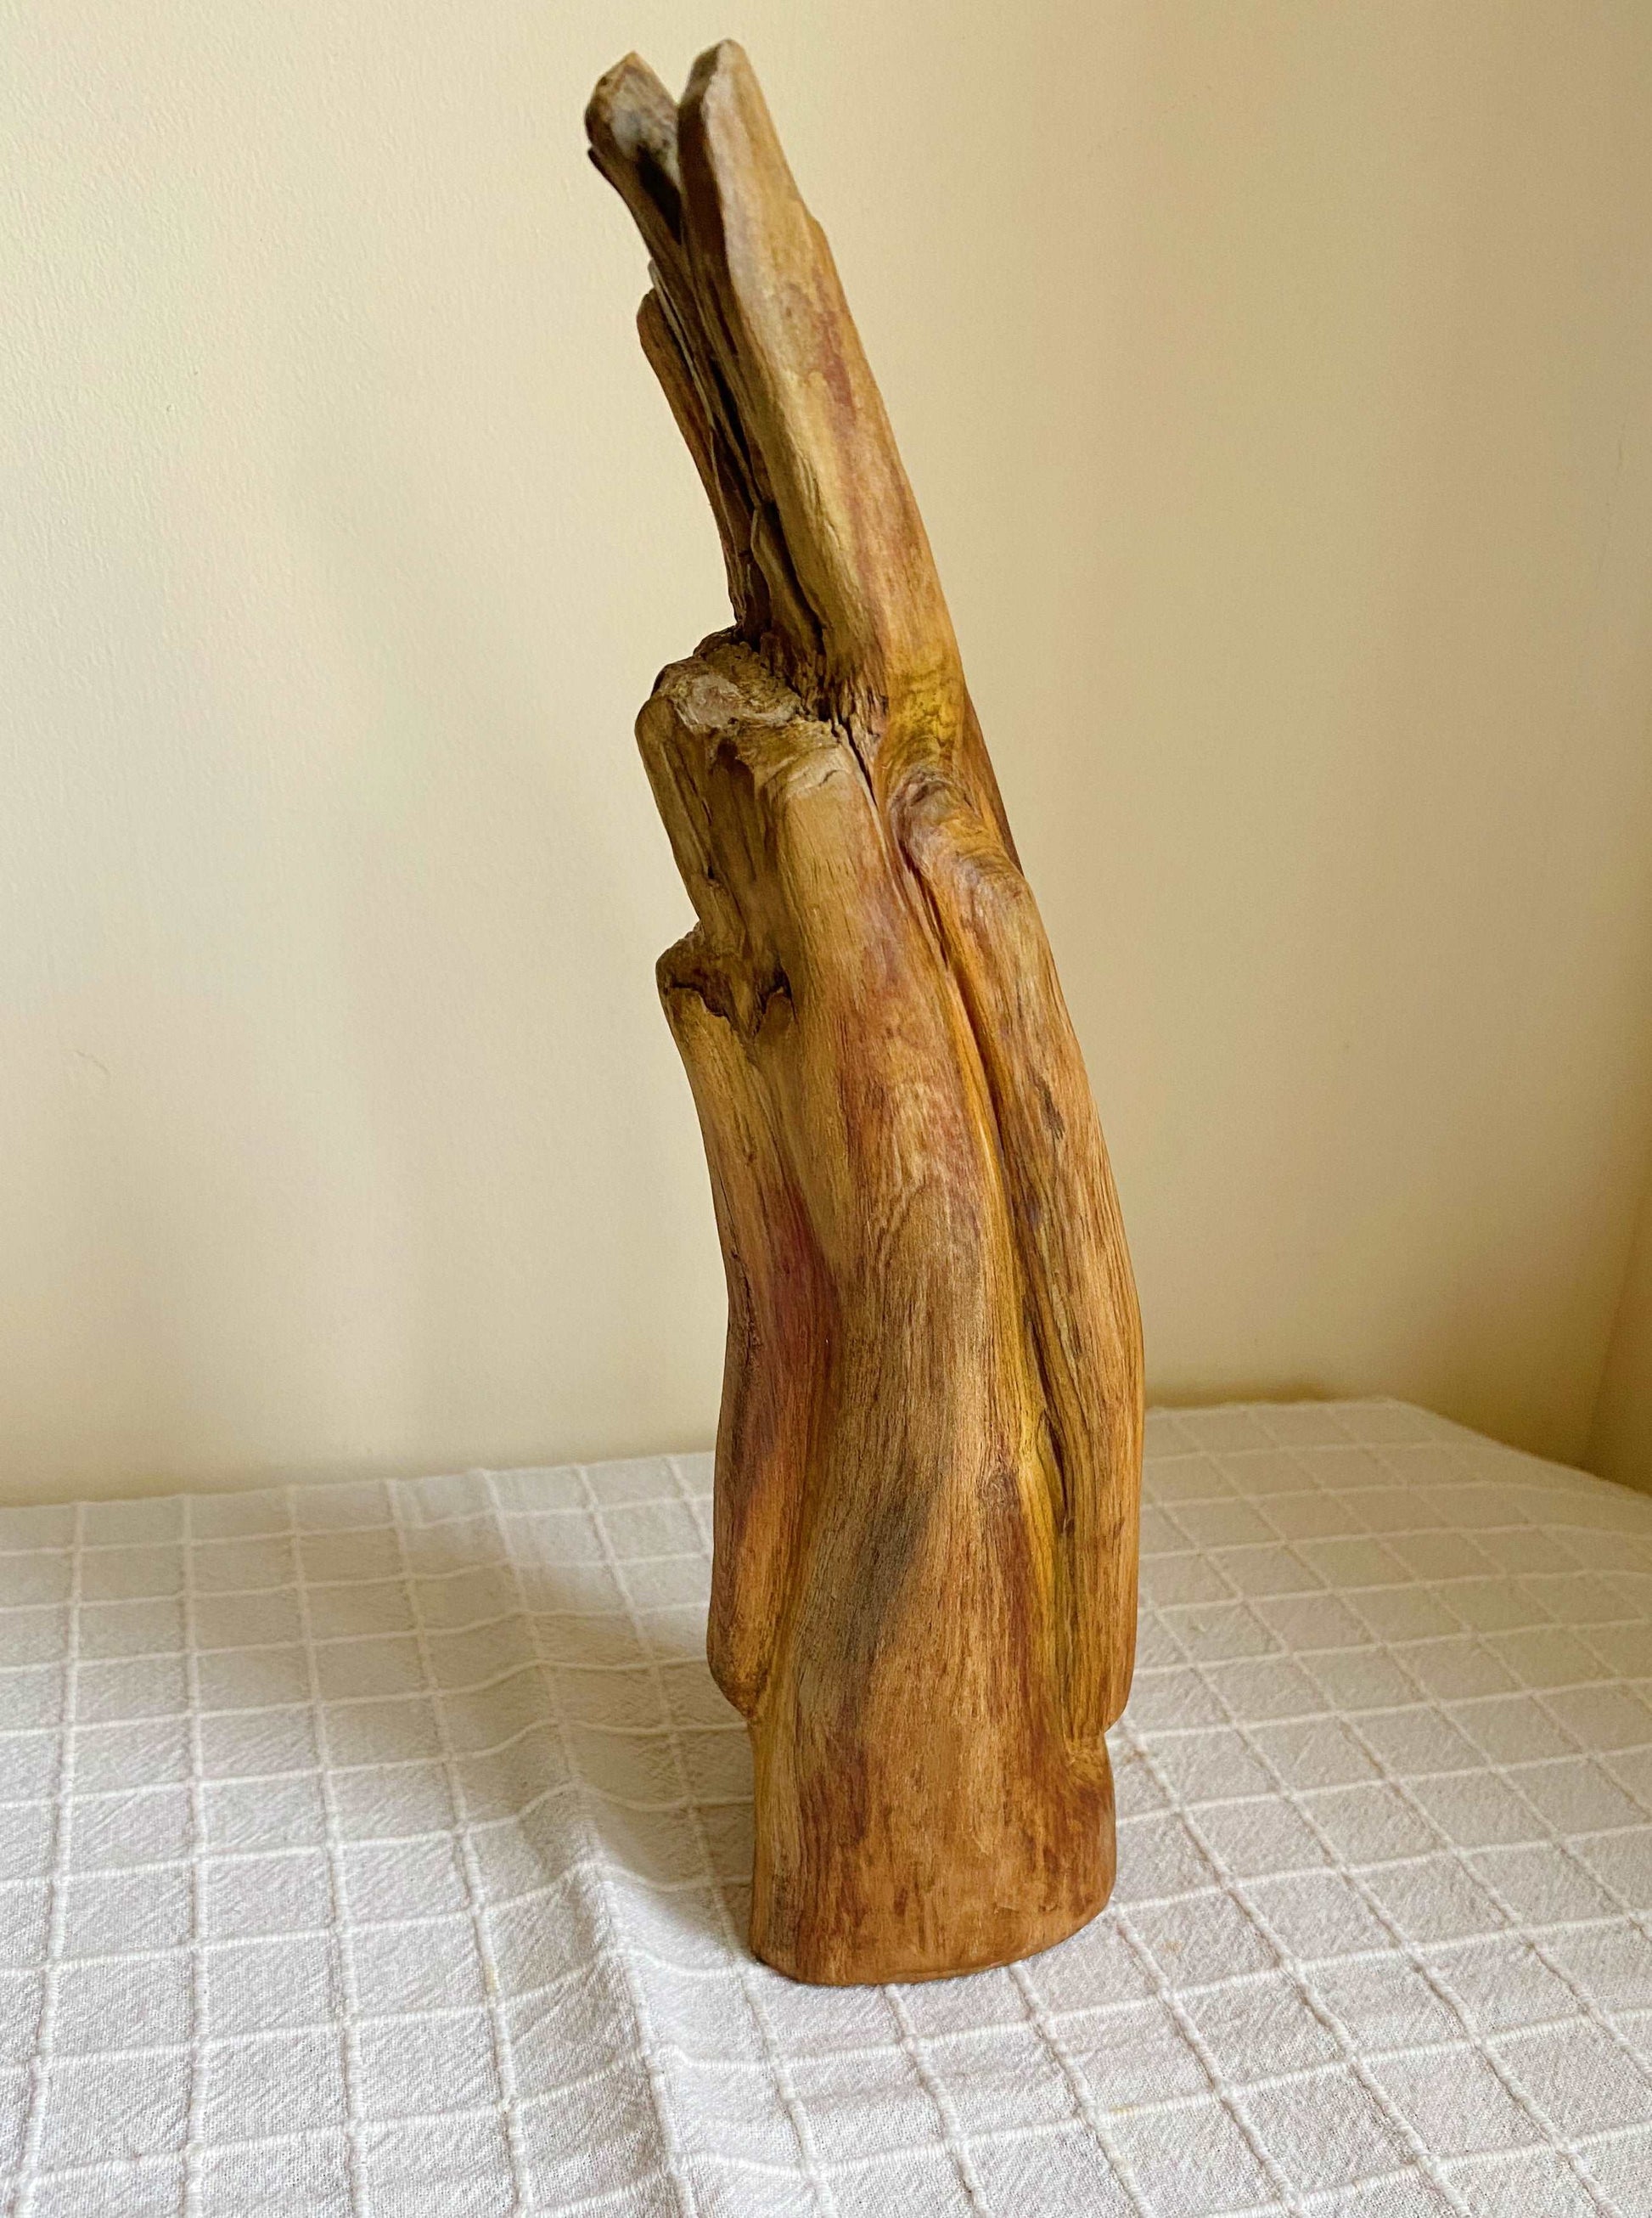 Hand Carved Easter Island Head Sculpture from Irish Bog Pine (soft wood) ranging in age from 3000 to 8000